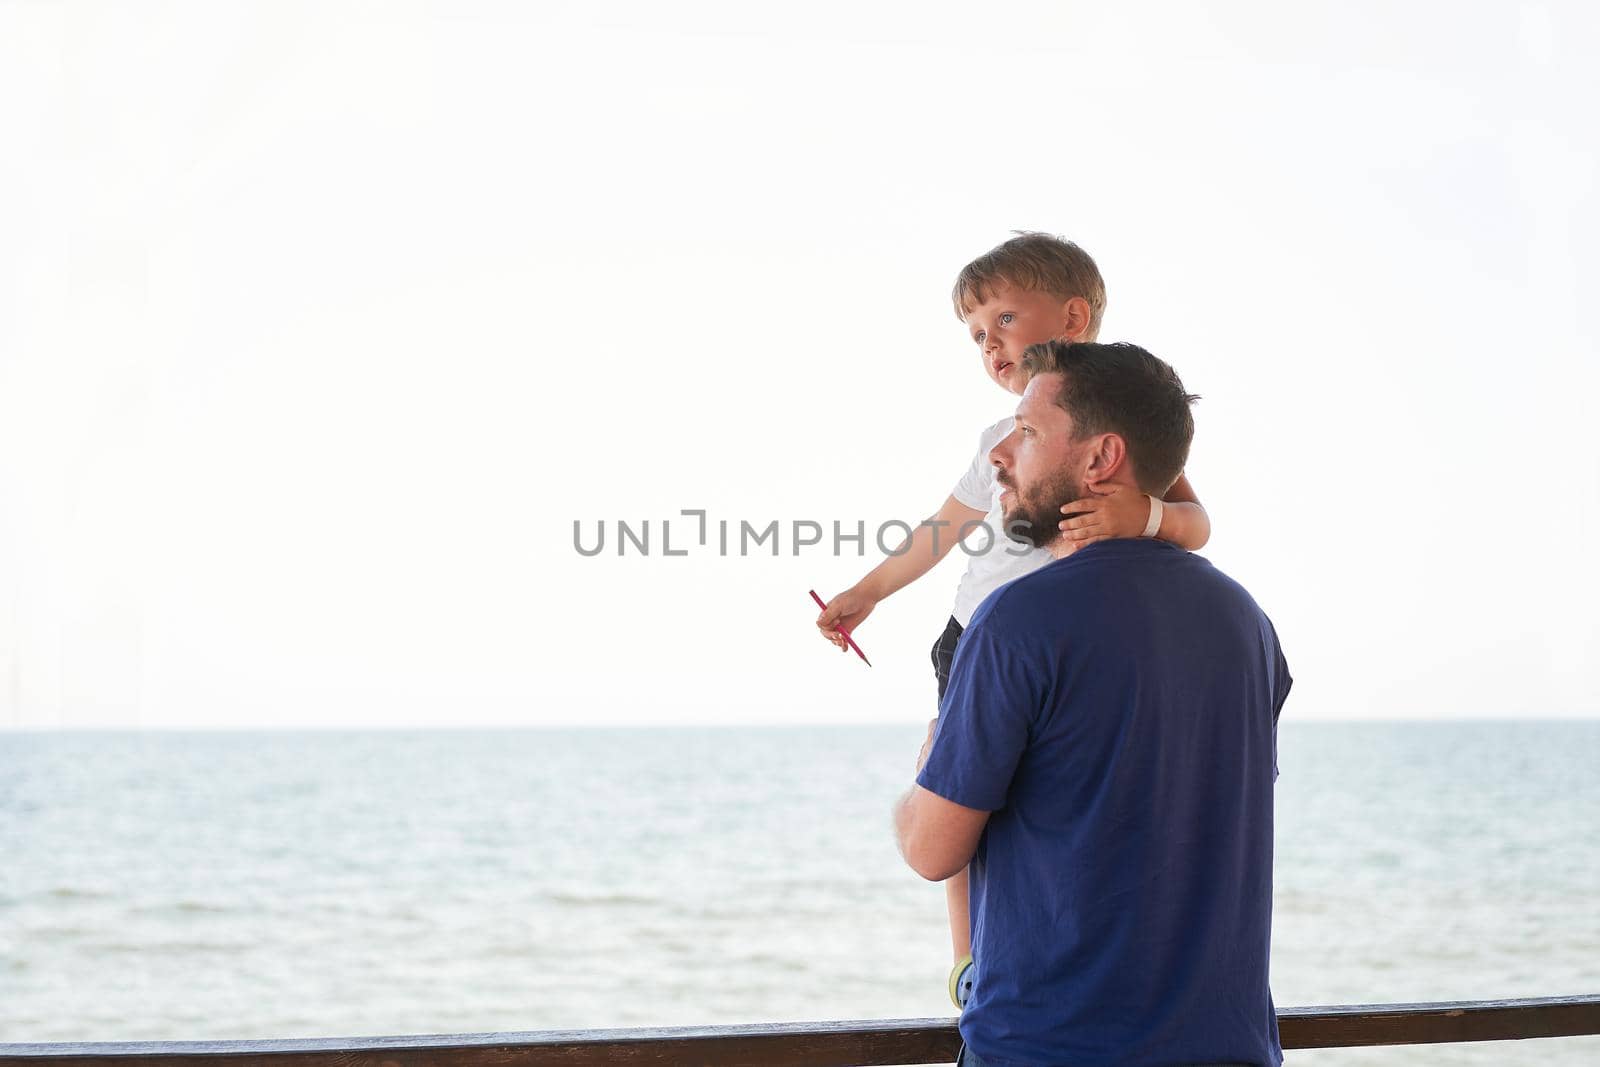 Father son together outside showing finger sea horizon back Man child spending time vacation enjoying summer Family with one child. Caucasian person beach